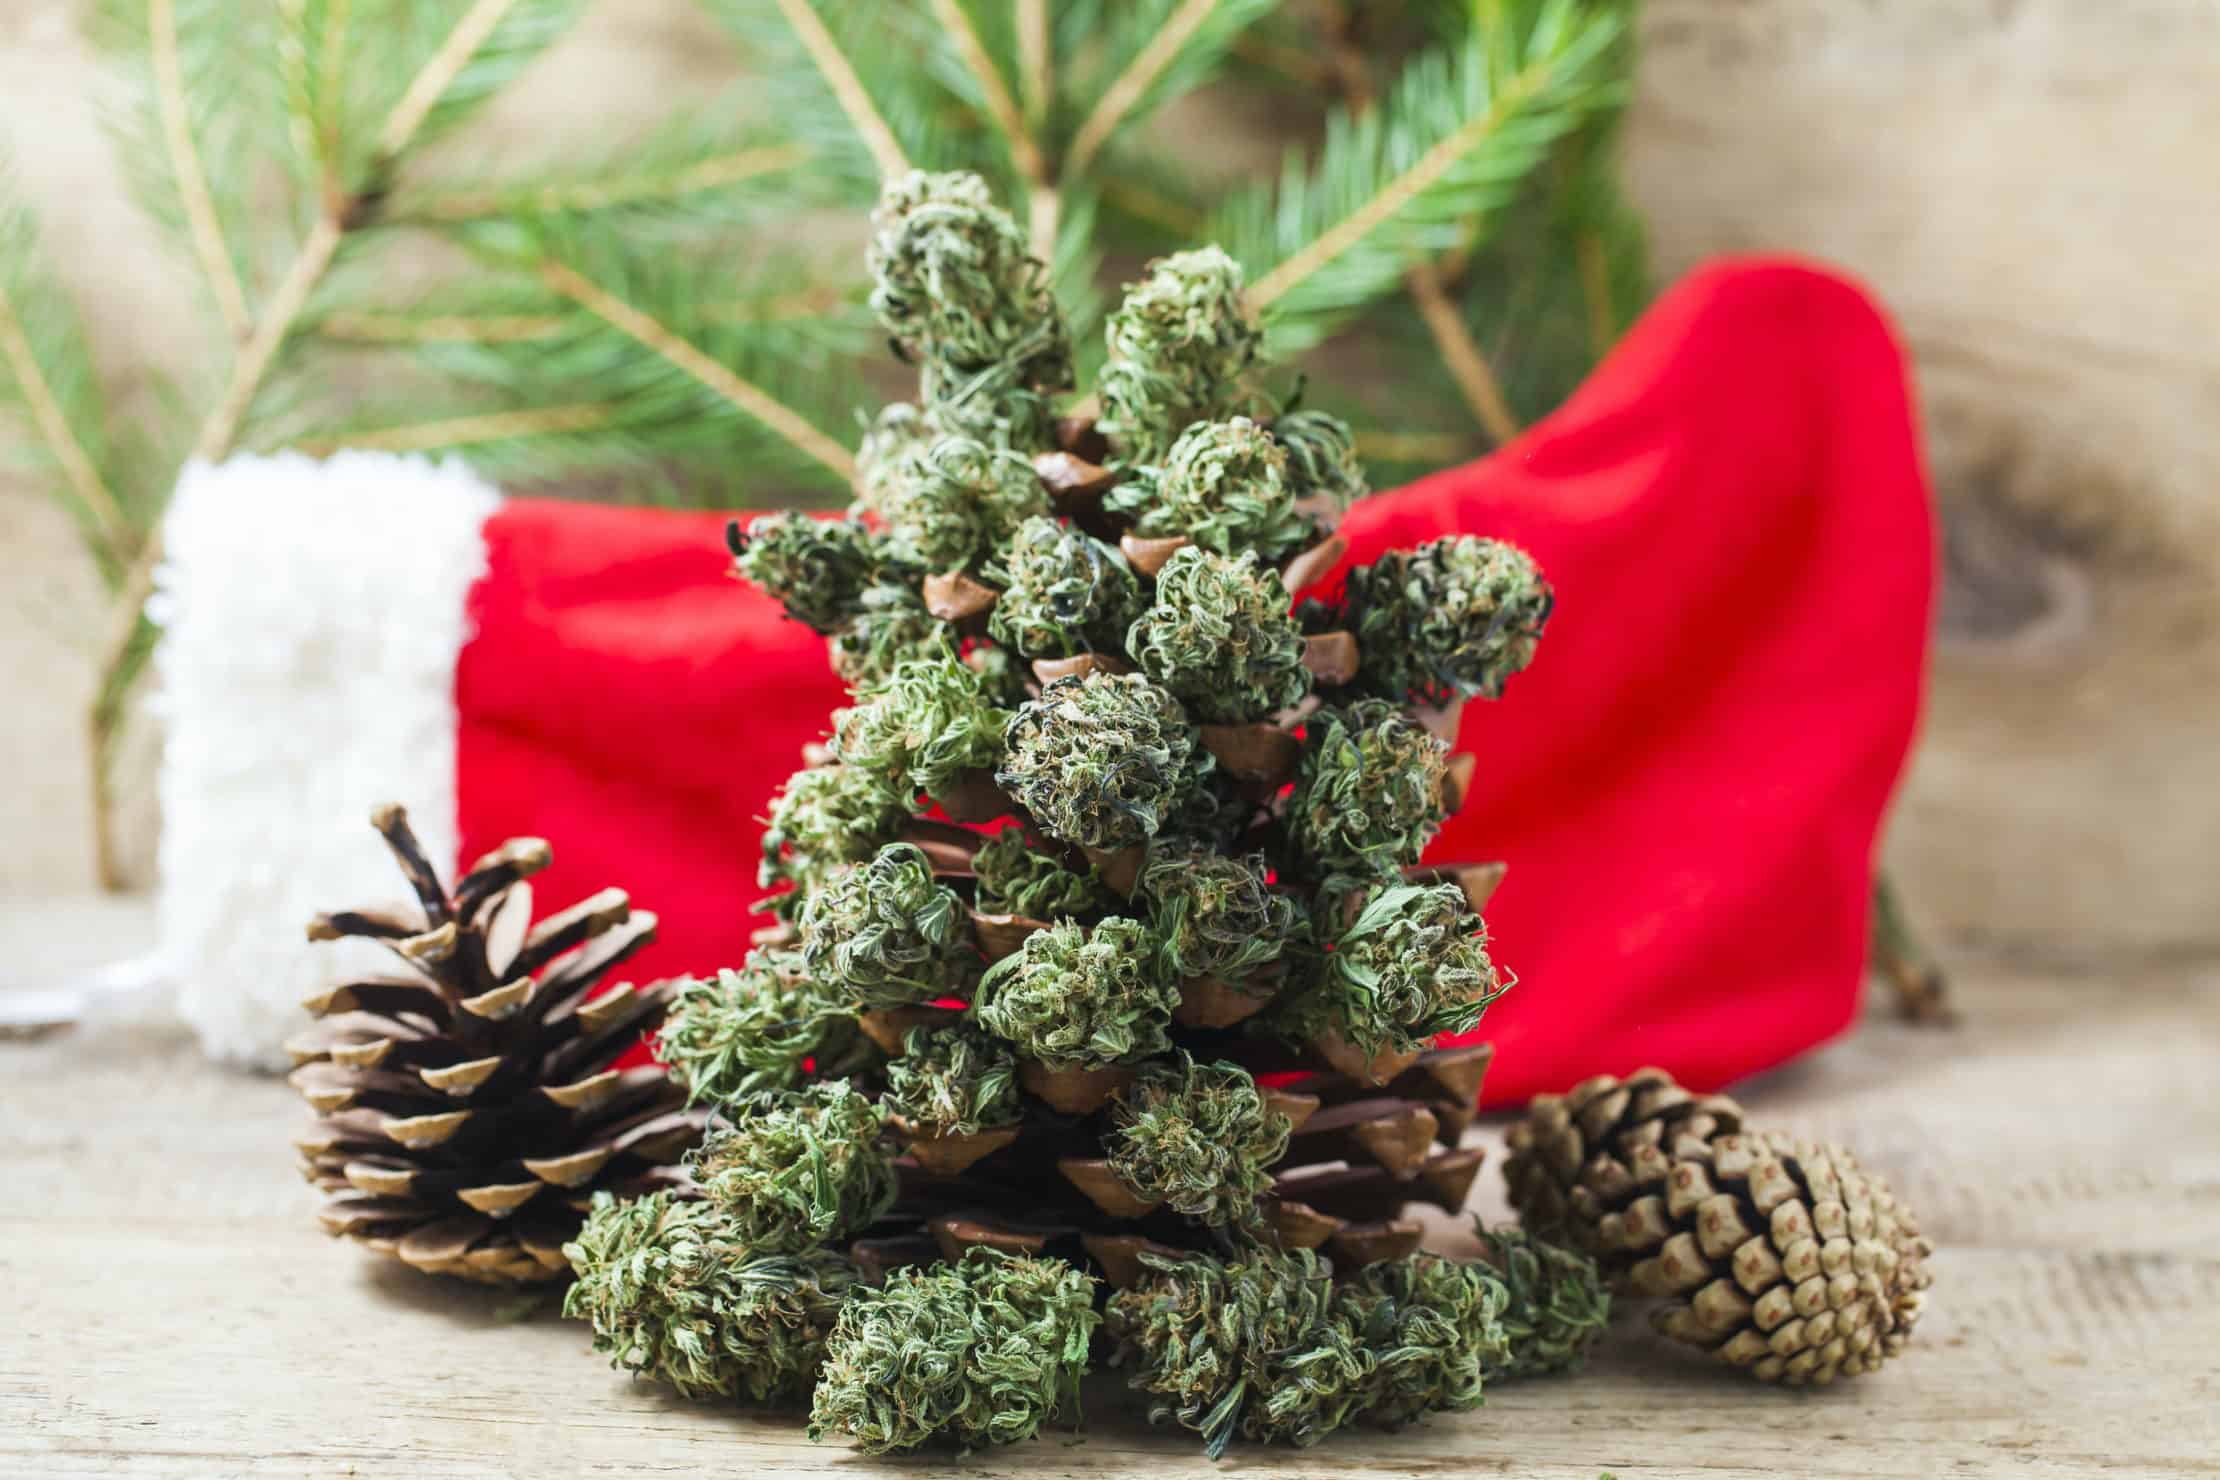 Affordable Cannabis Gifts for the Holidays